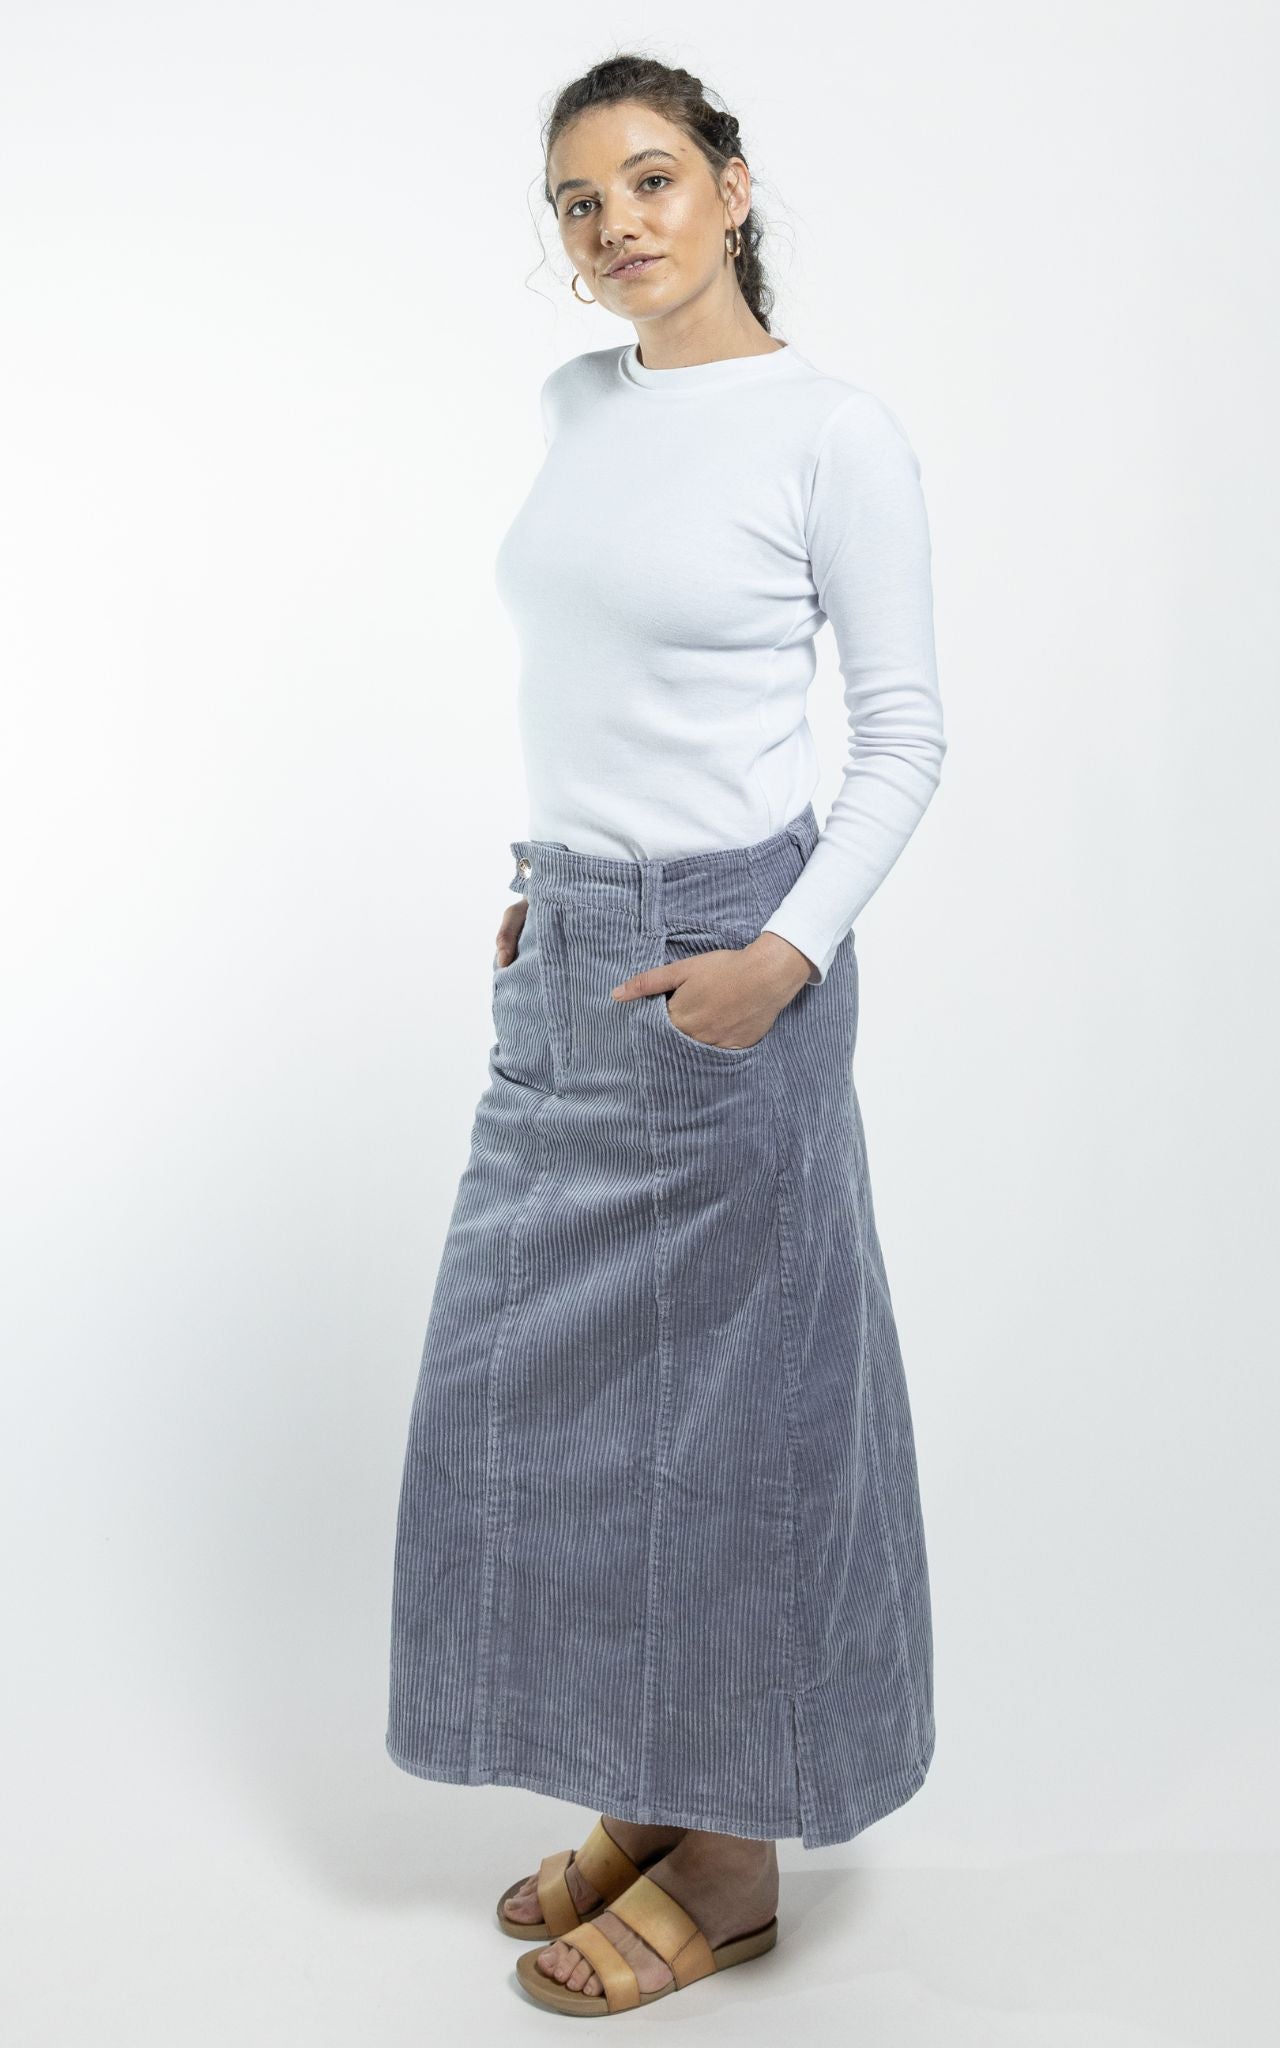 Surya Ethical Corduroy Maxi Skirt made in Nepal - Sky Blue